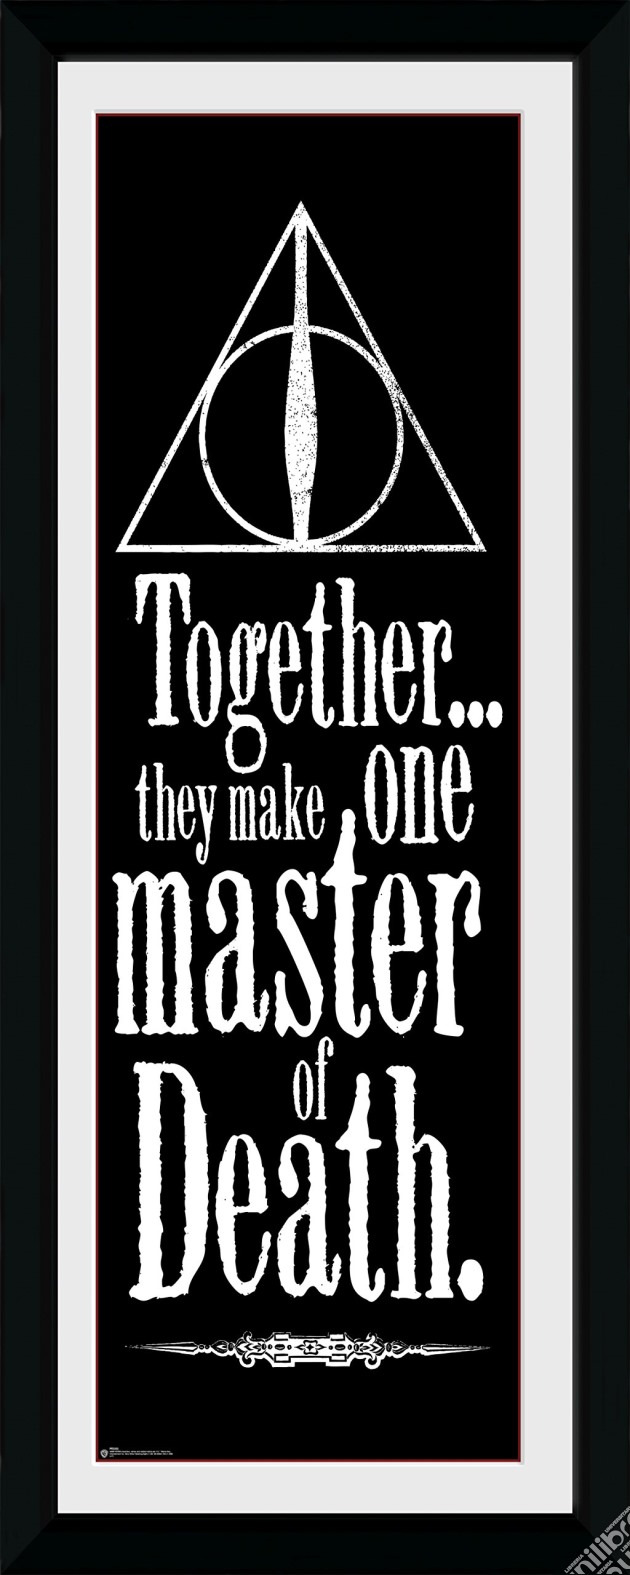 Harry Potter - Deathly Hallows (Stampa In Cornice 75x30 Cm) gioco di GB Eye